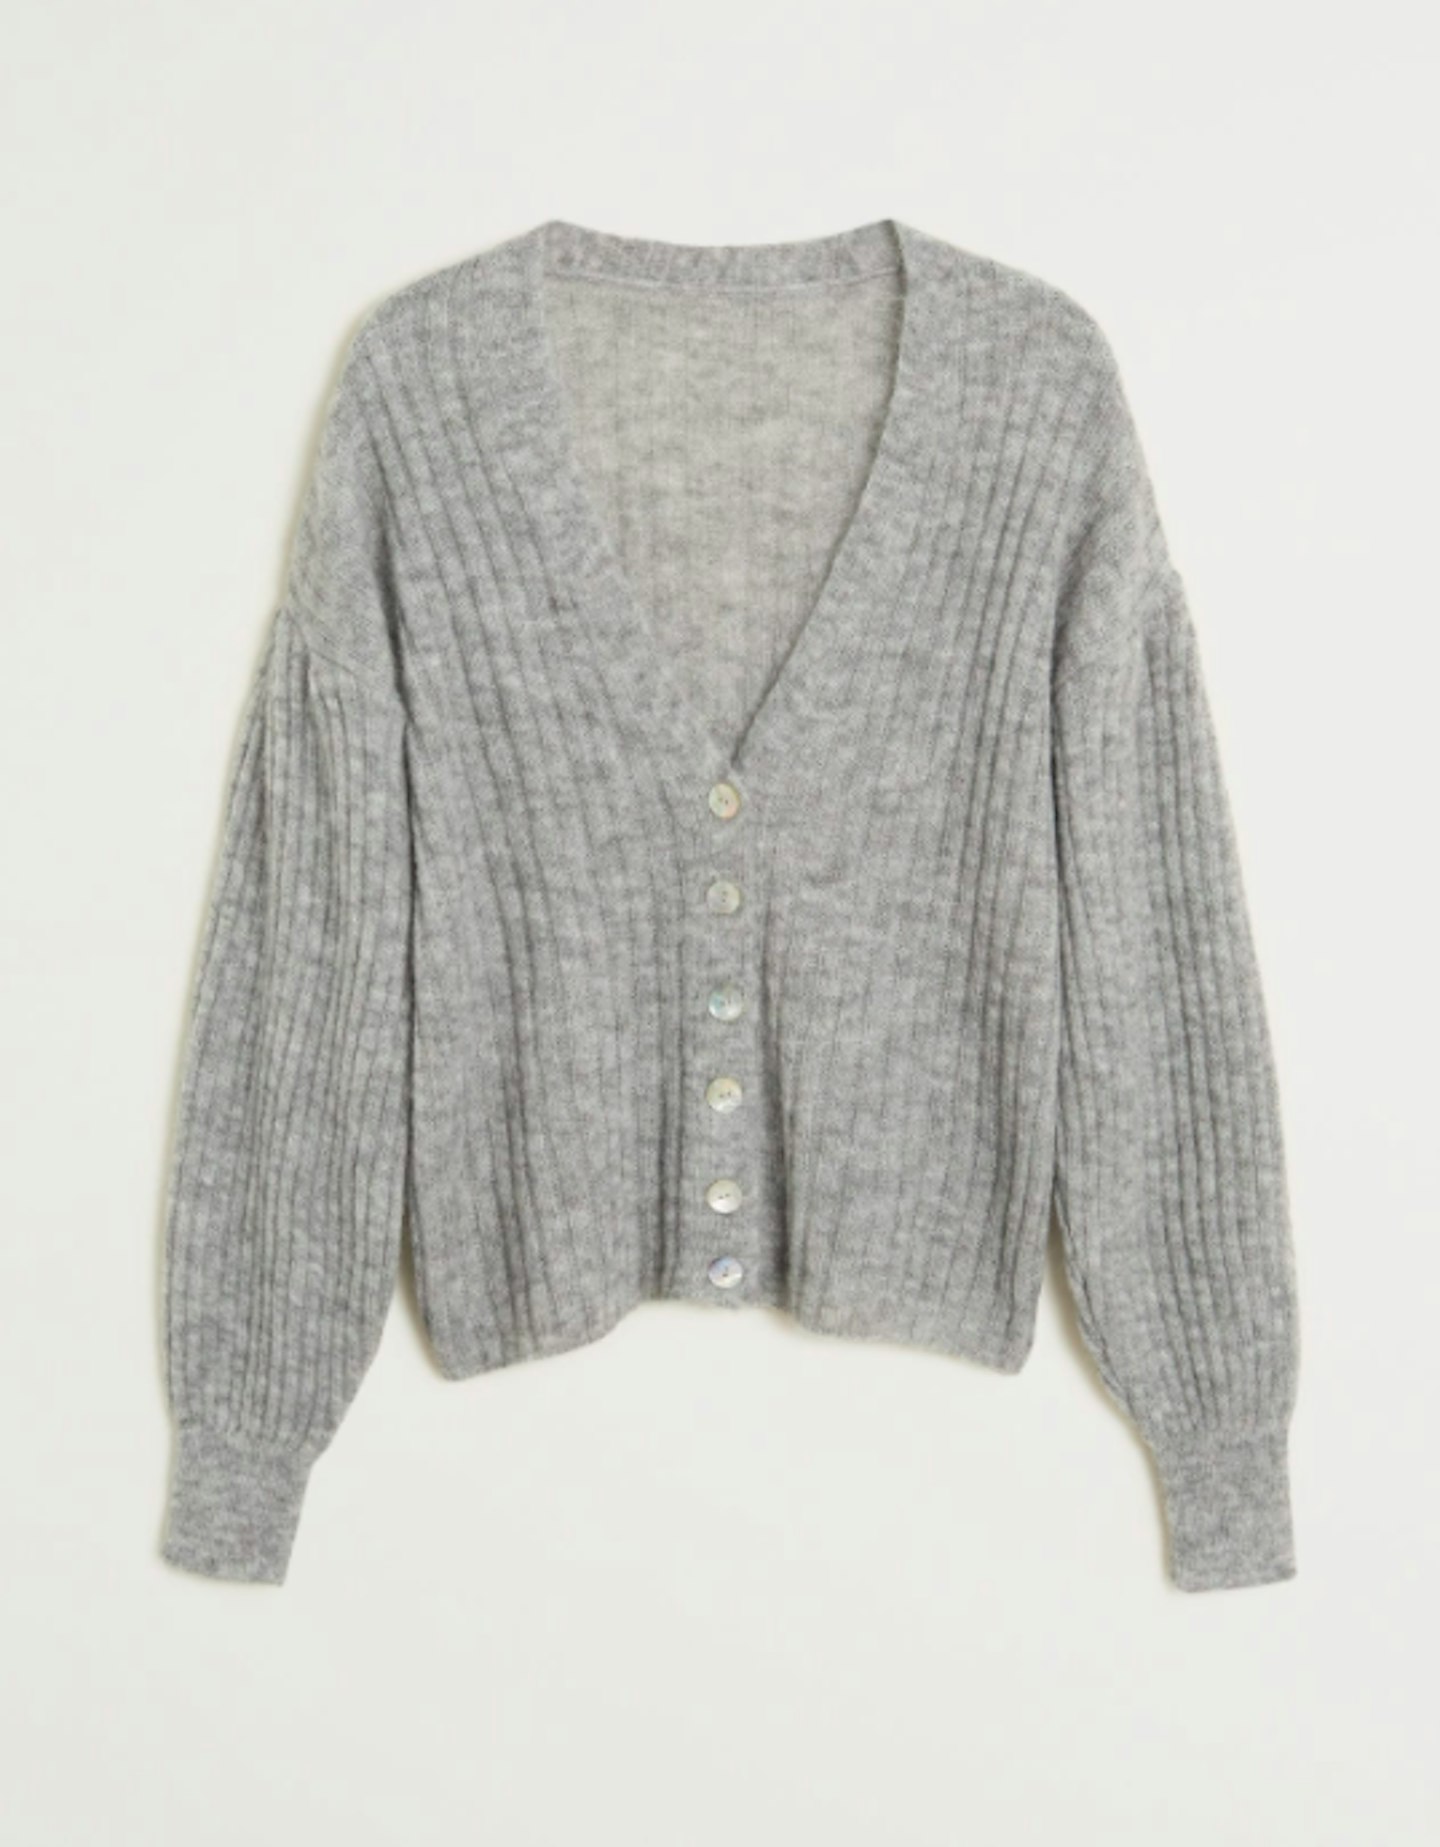 Primark Knitted Bra And Cardigan: Get The Katie Holmes Look For £20